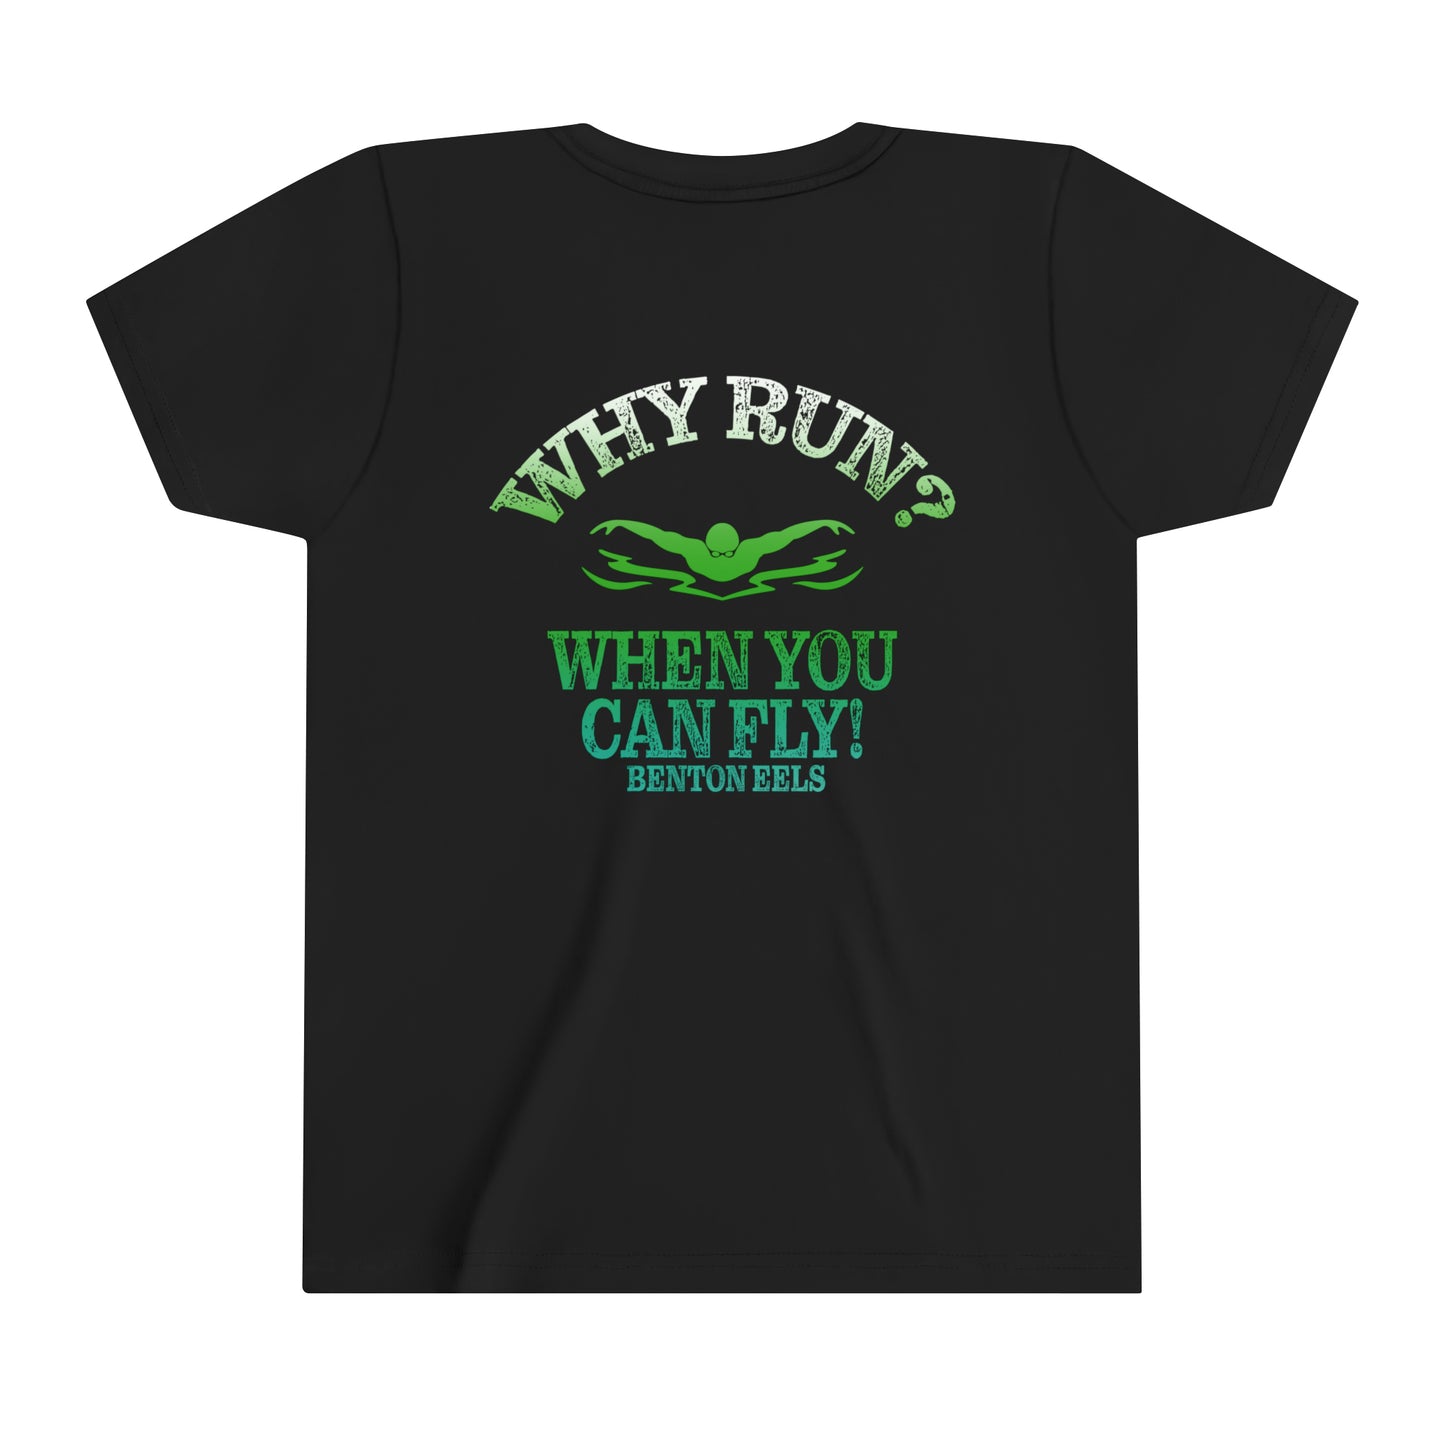 YOUTH T-SHIRT - WHY RUN WHEN YOU CAN FLY